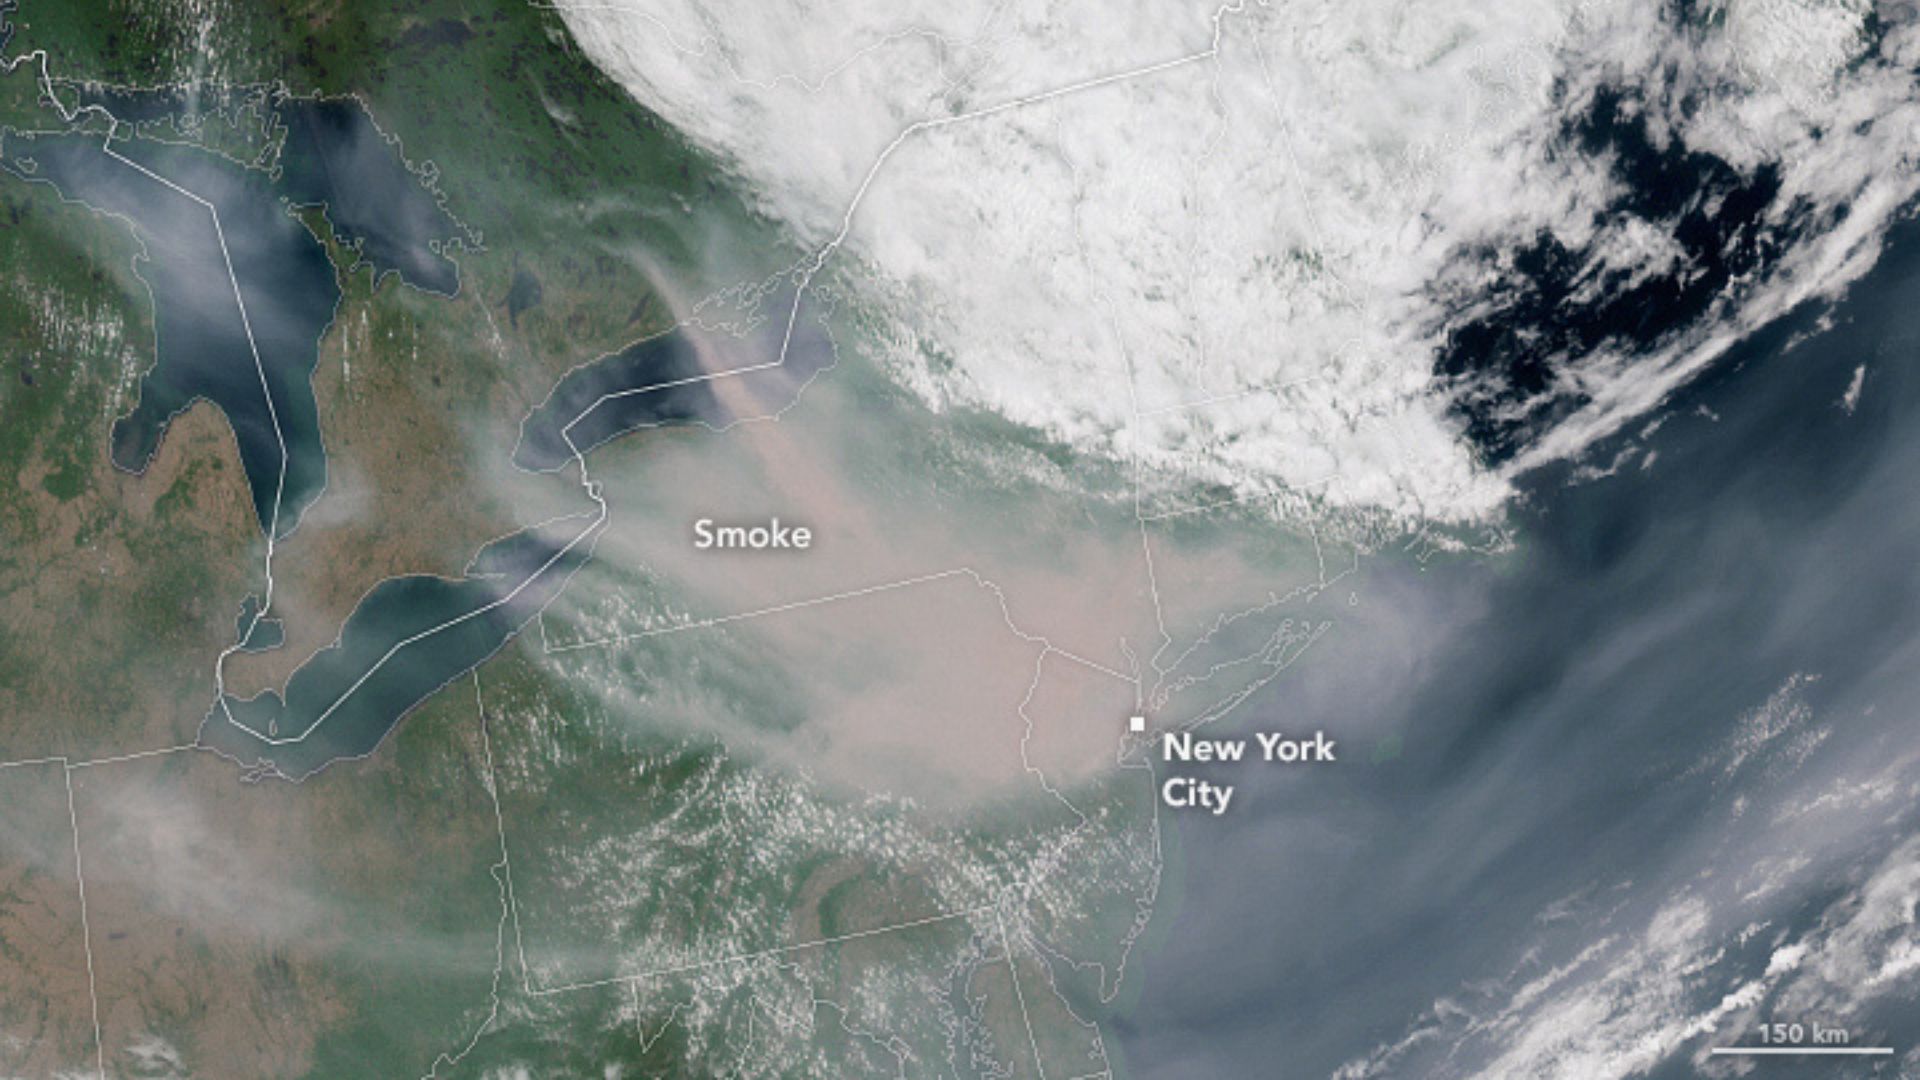 satellite photo shows the northeastern US and eastern Canada. A weather system can be seen over Maine and Nova Scotia, and a massive cloud of wildfire smoke can be seen southeast of that, floating from canada to new york city, which is labeled